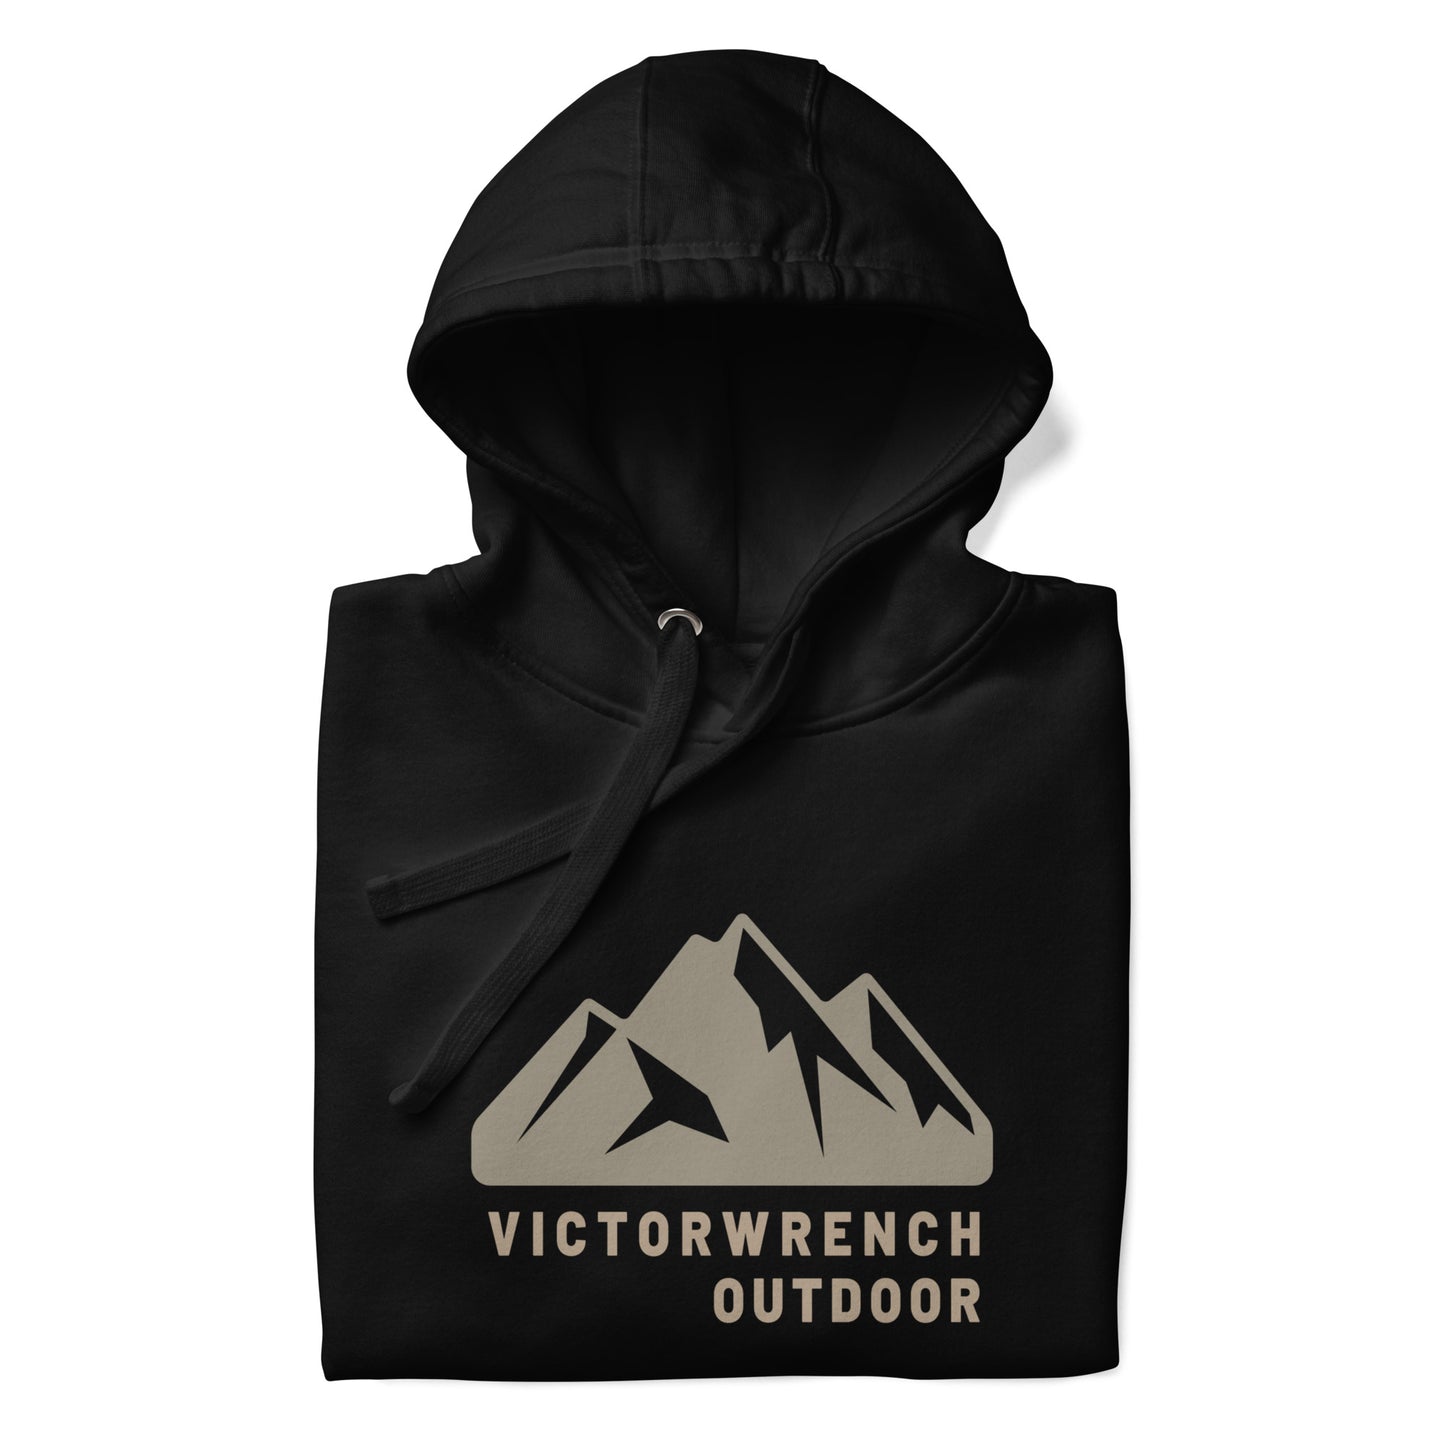 Victorwrench Outdoor Hoodie